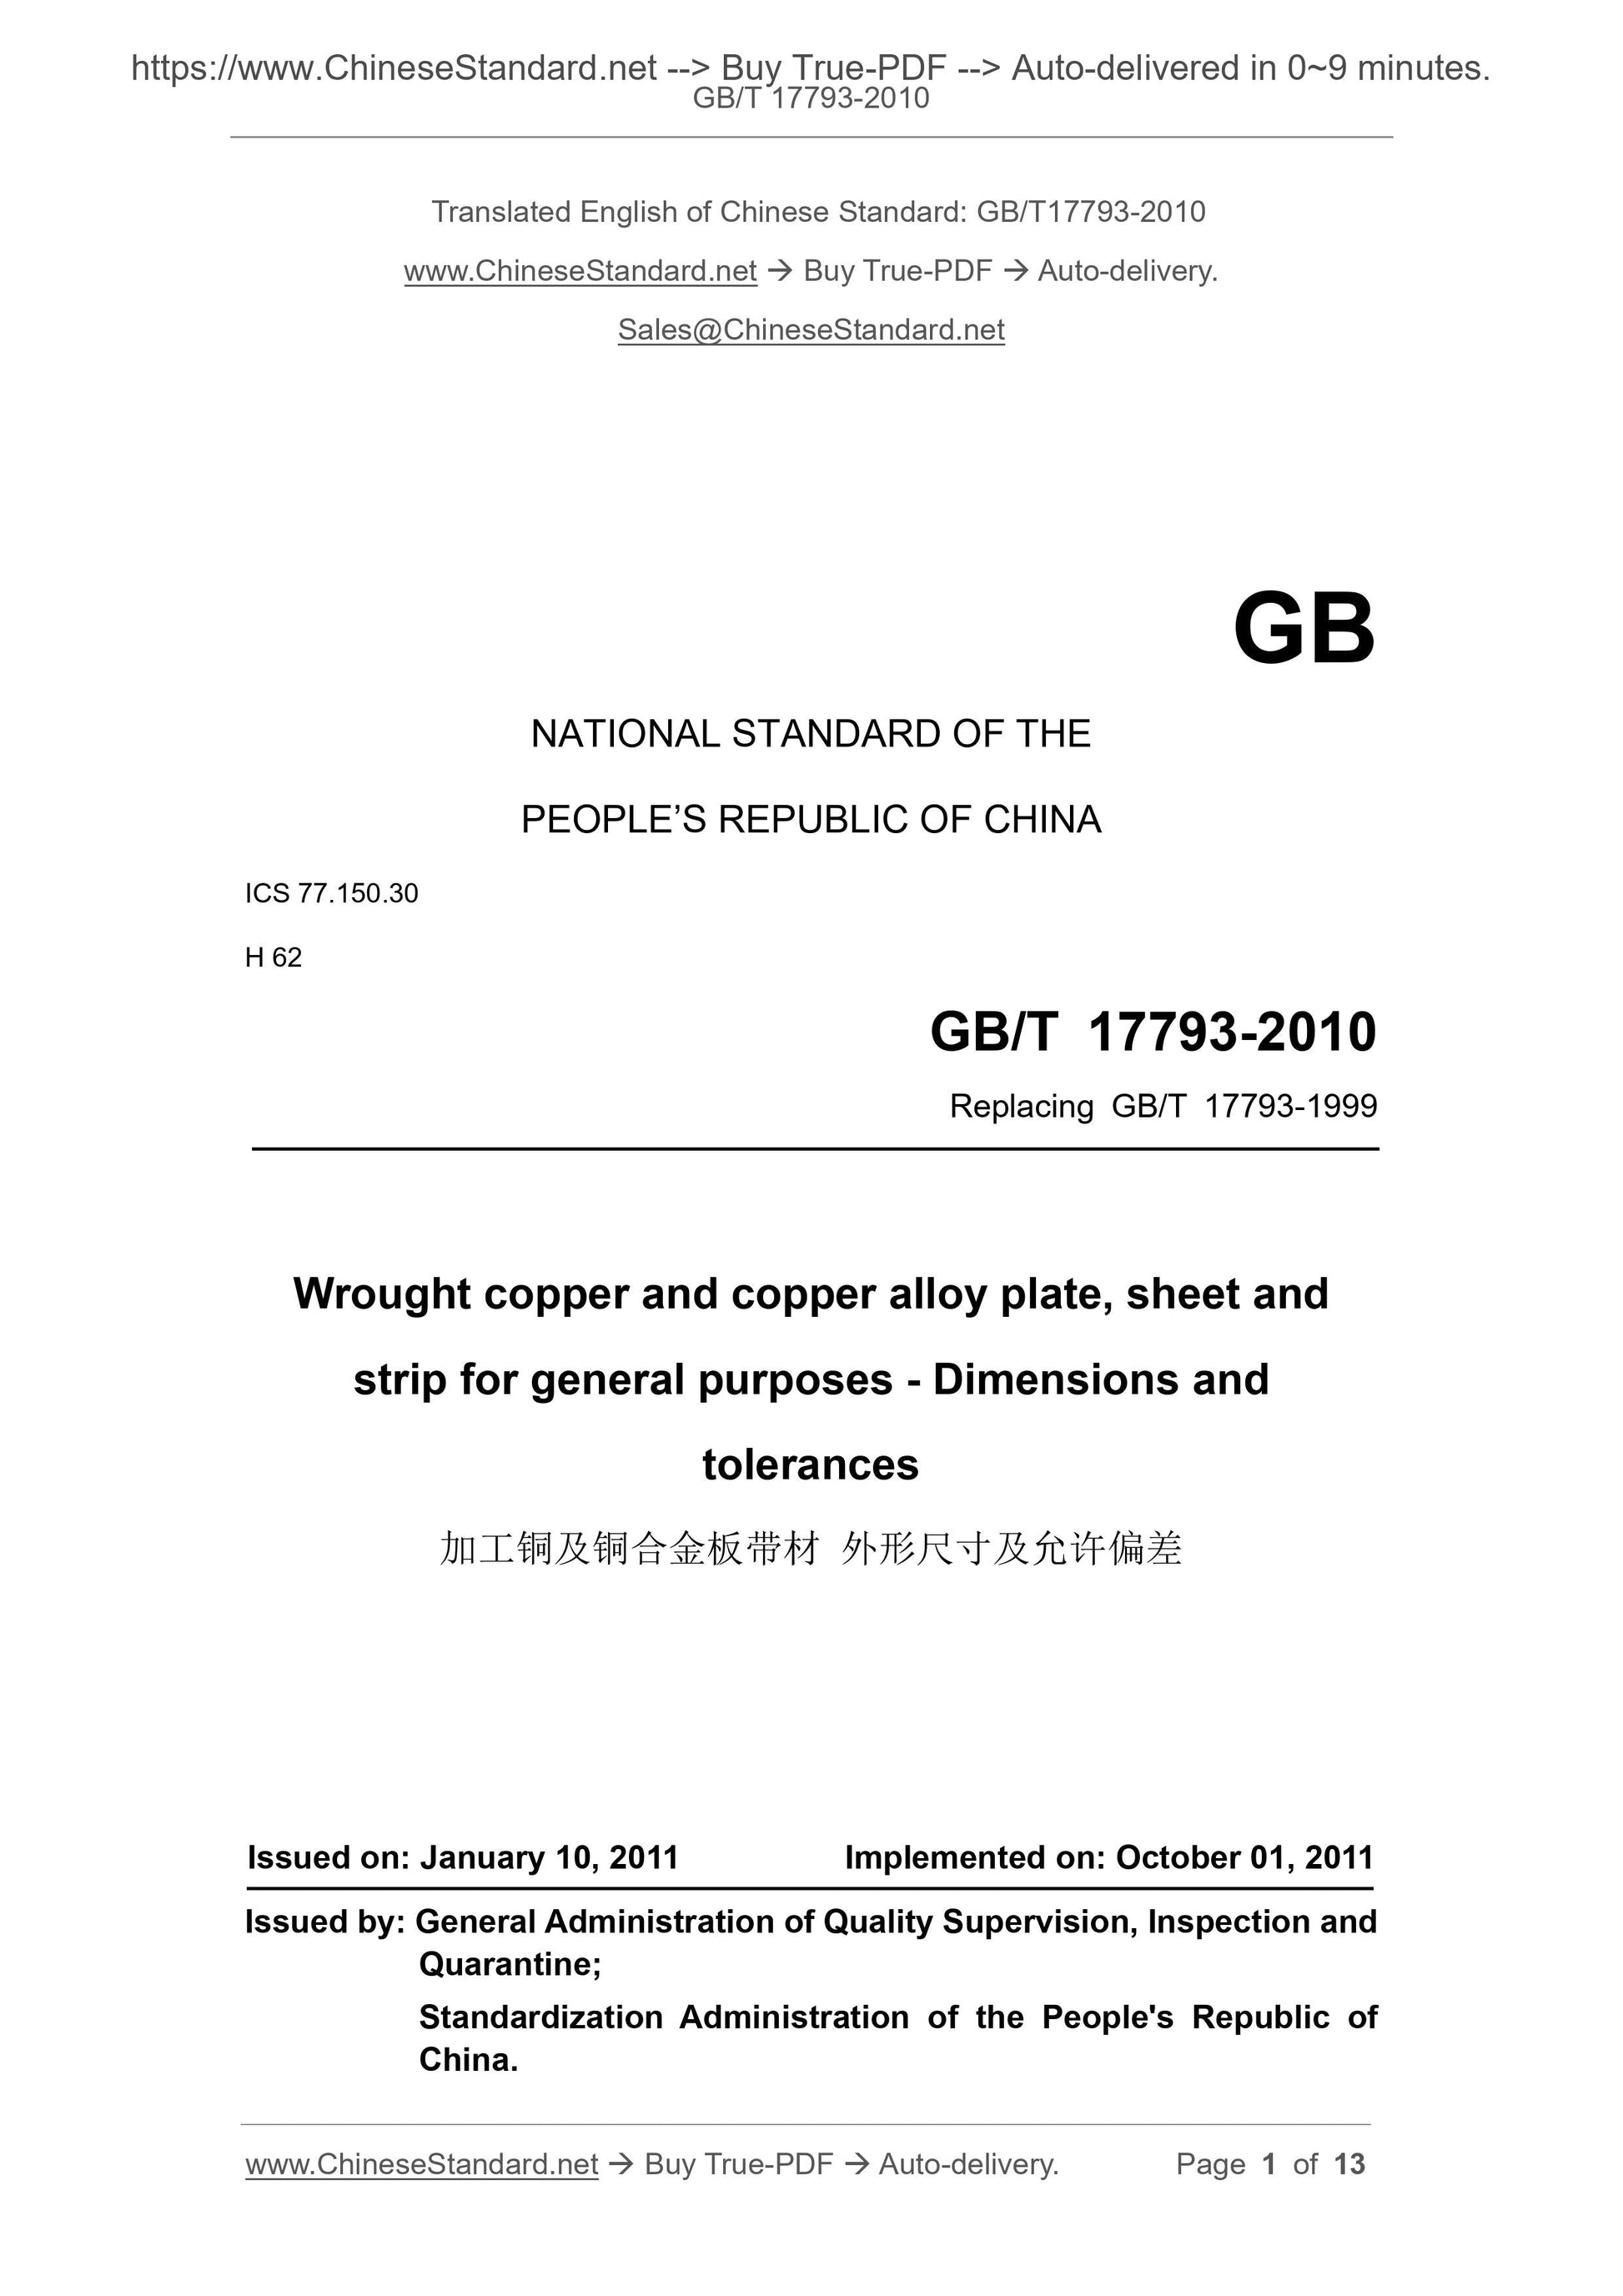 GB/T 17793-2010 Page 1